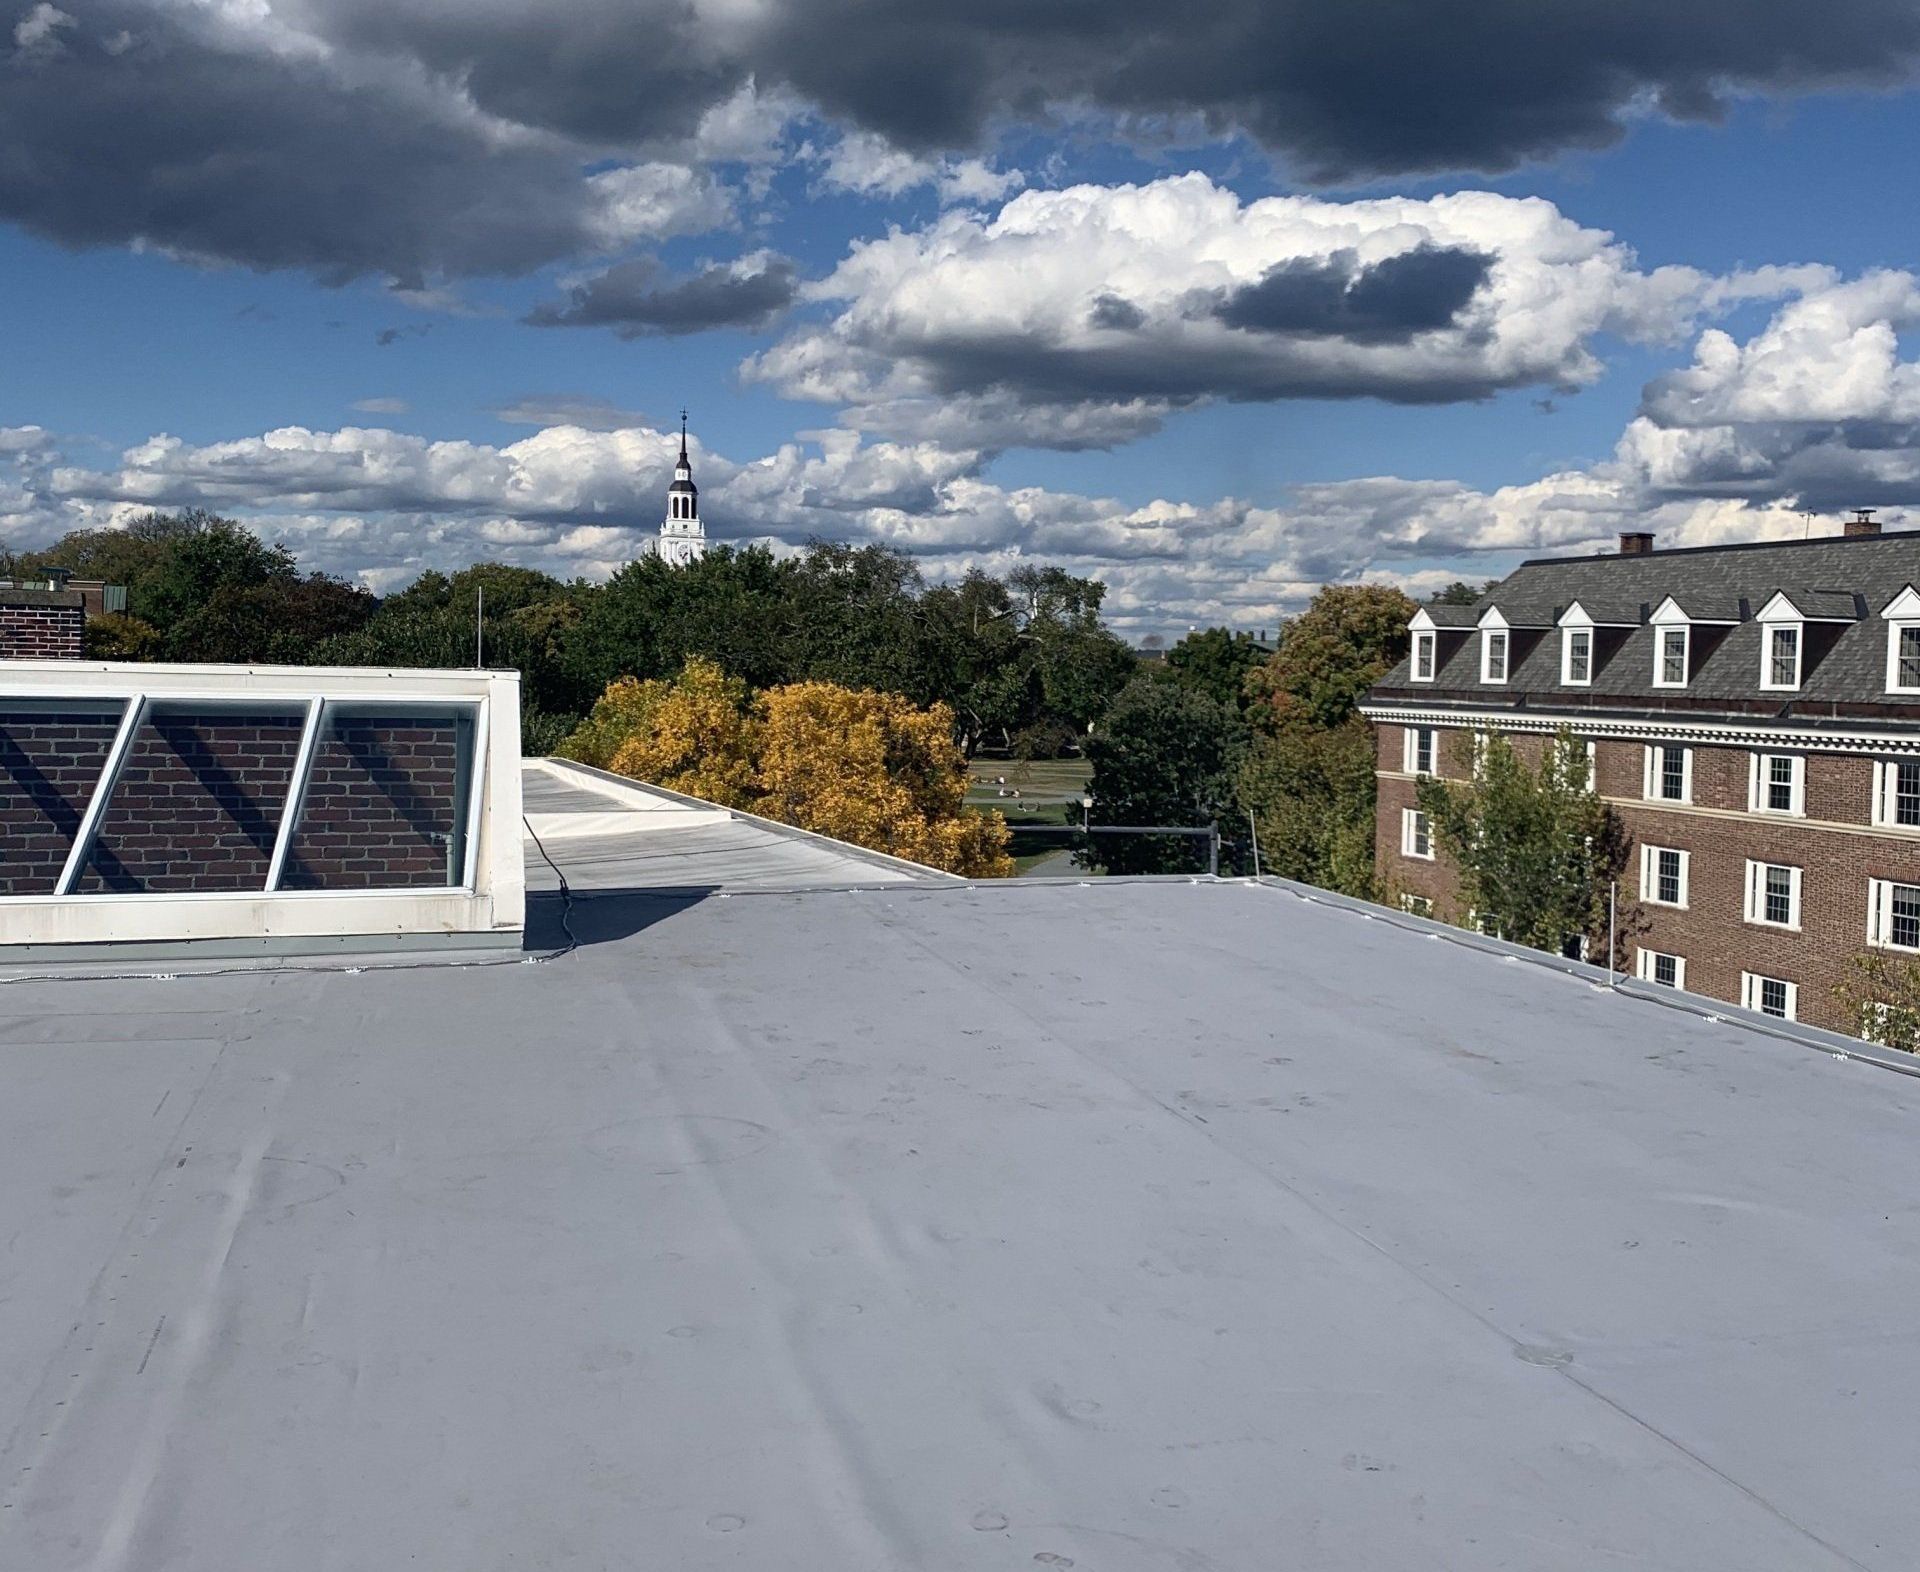 A commercial flat roof with skylights overlooking a Vermont town